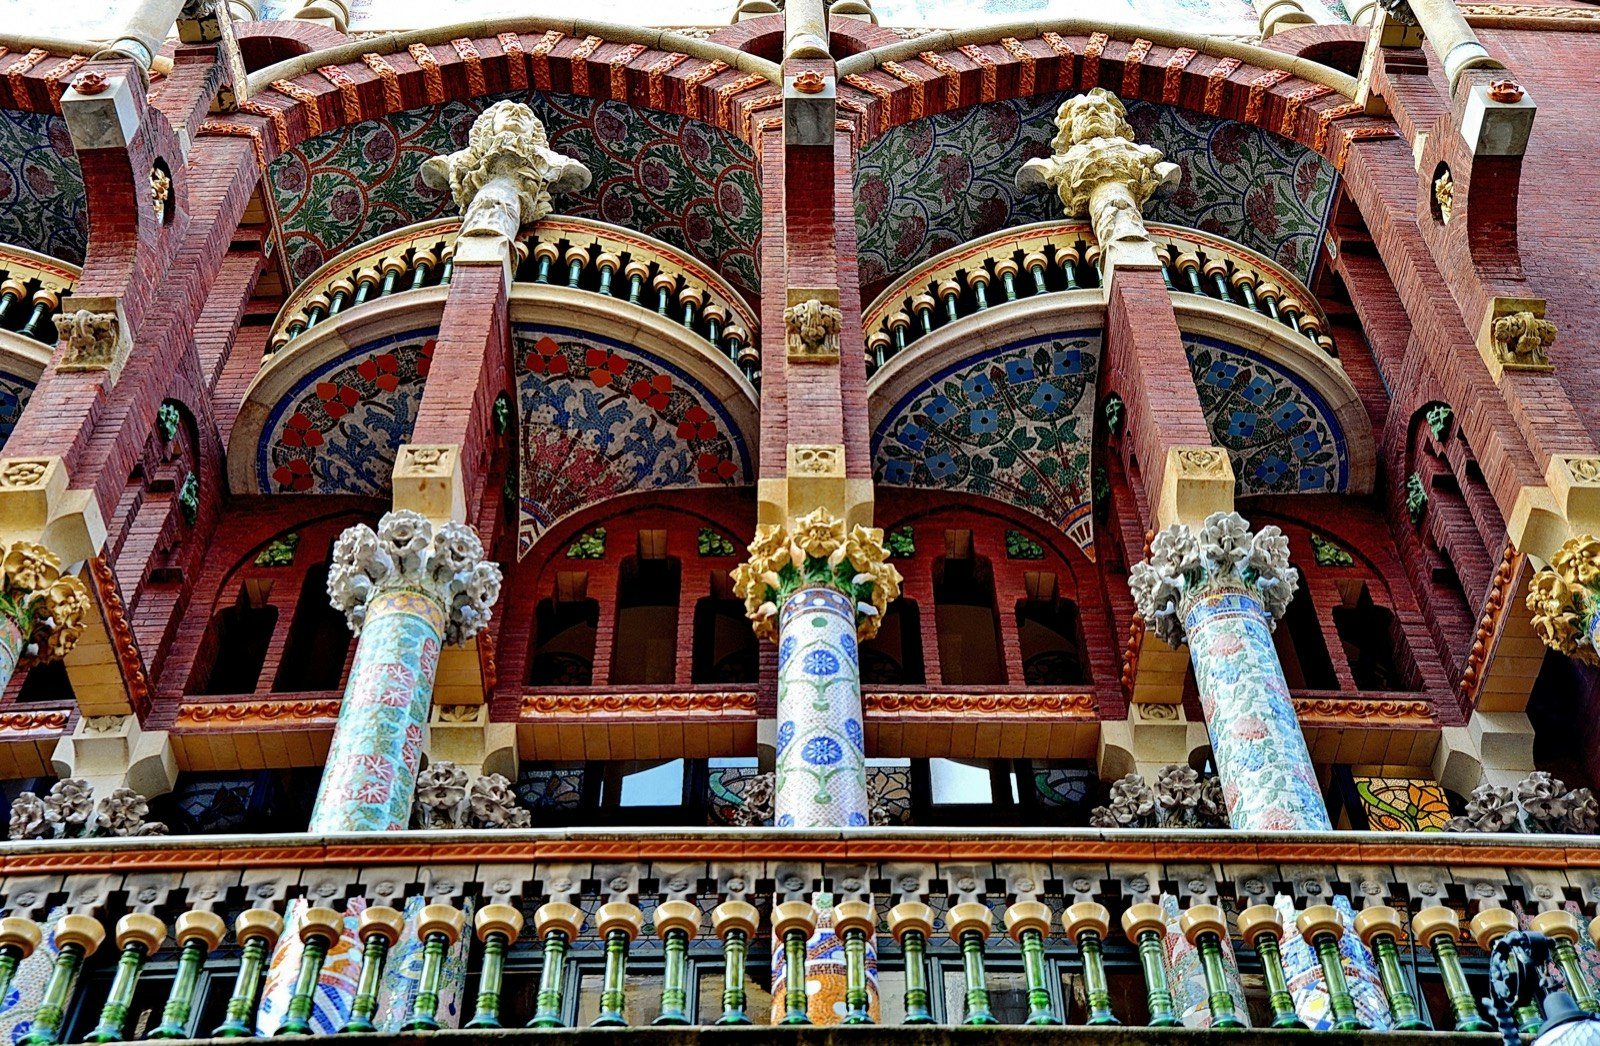 A balcony of the Palau de la Música Catalana decorated with many multi-colored mosaics on the bannisters and columns